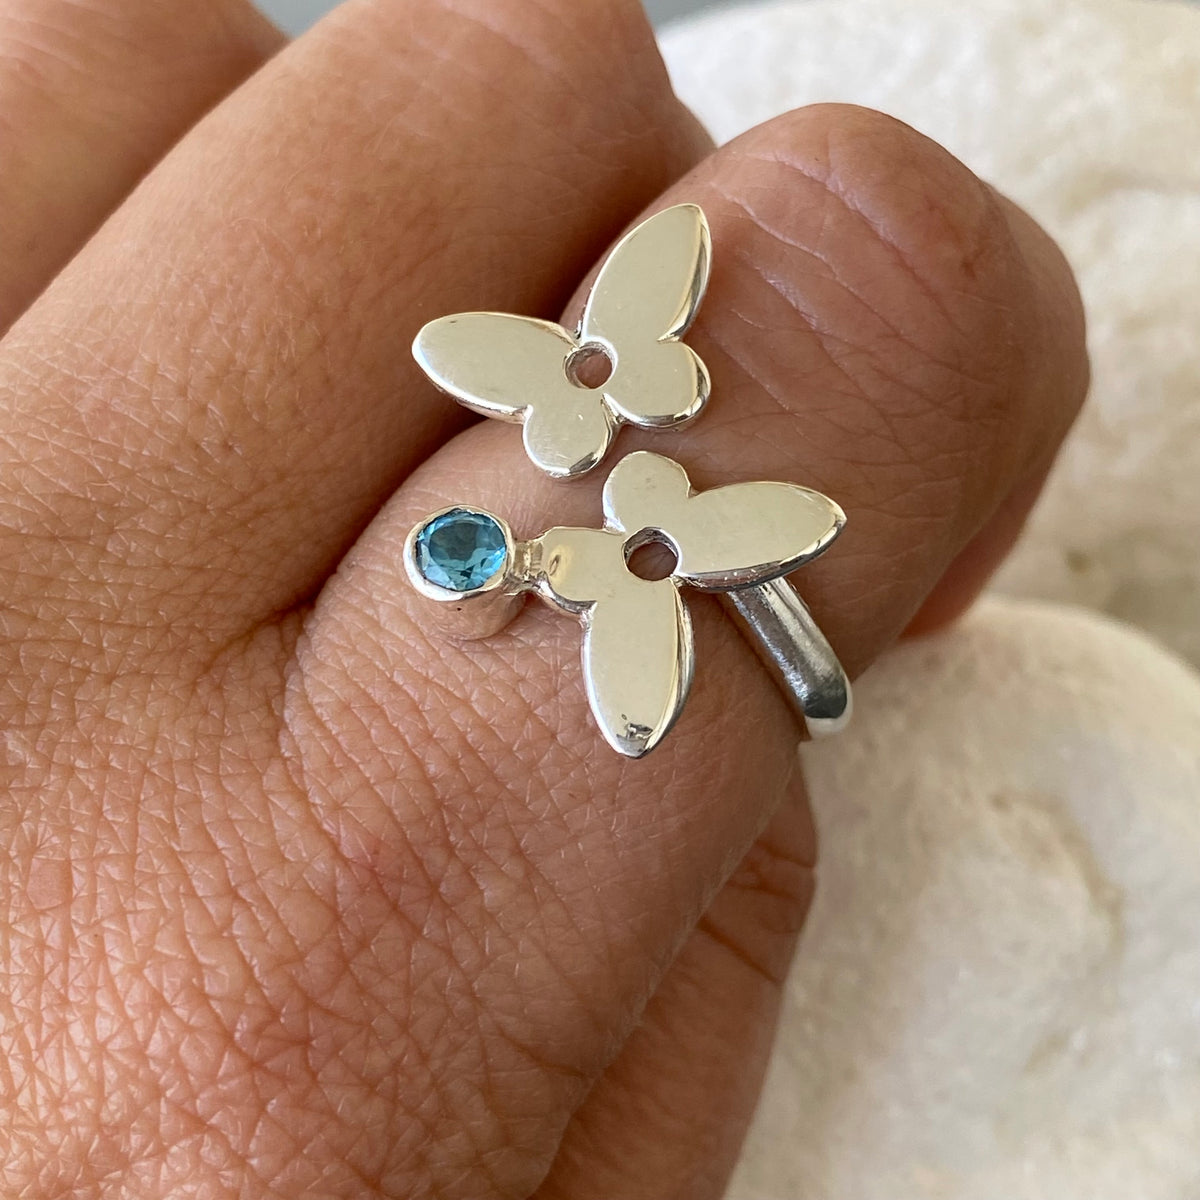 Silver Butterfly ring adjustable with blue gemstone